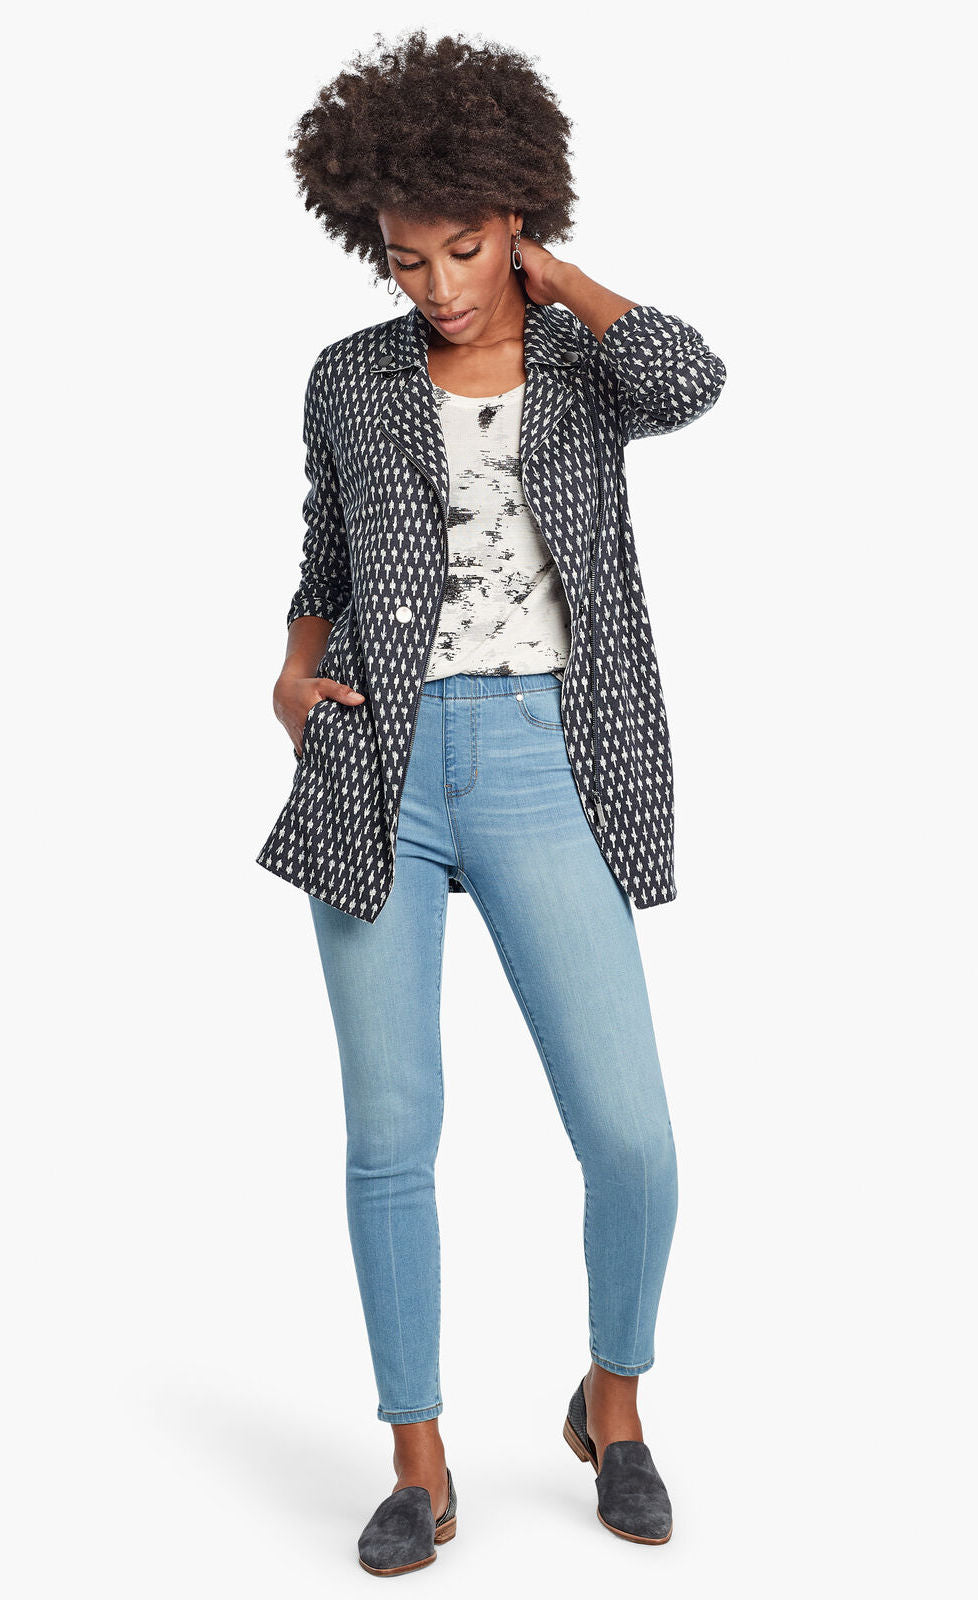 Front, full body view of a woman wearing the Nic + Zoe Ponte Ikat Jacket over a white printed top and with fitted jeans. The jacket is indigo with a white speck print all over it. It has a flat, notched lapel, and a front, off-center zipper.